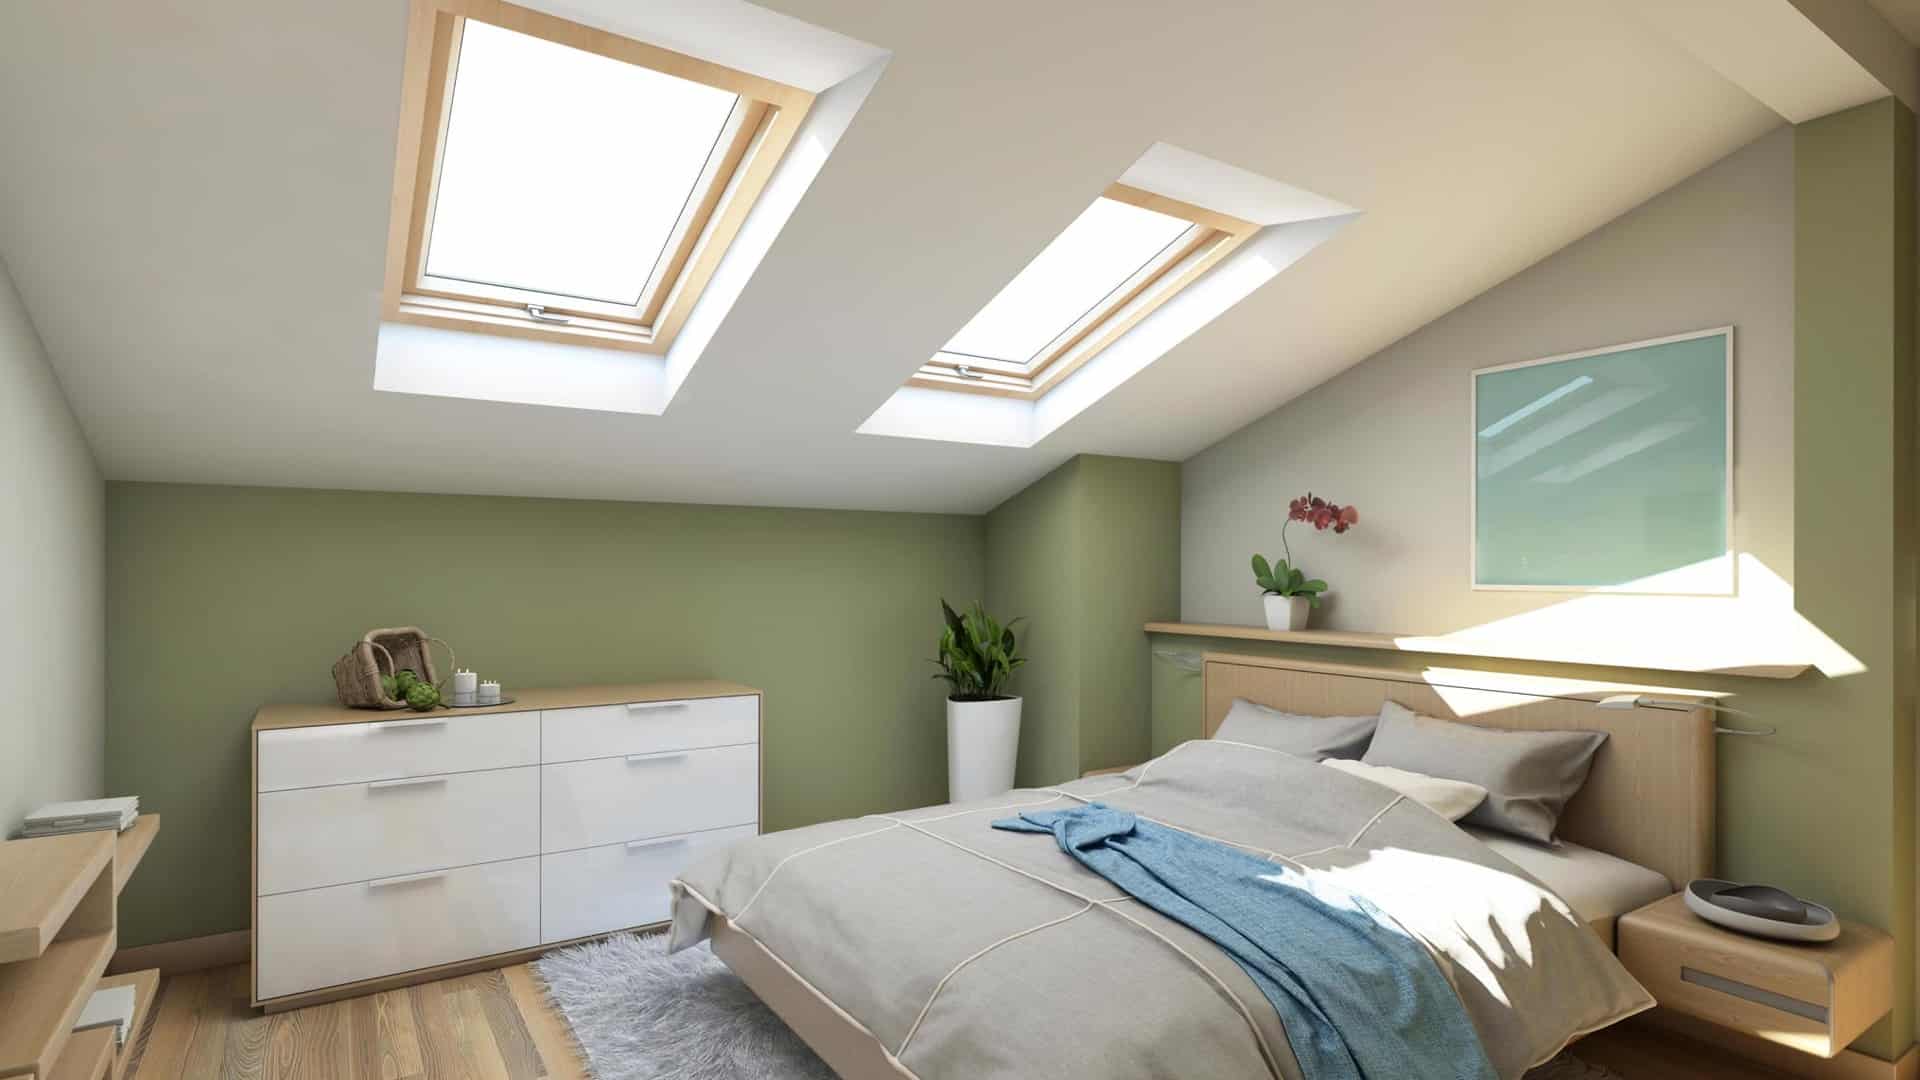 Loft conversion bedroom, green wall and bedding